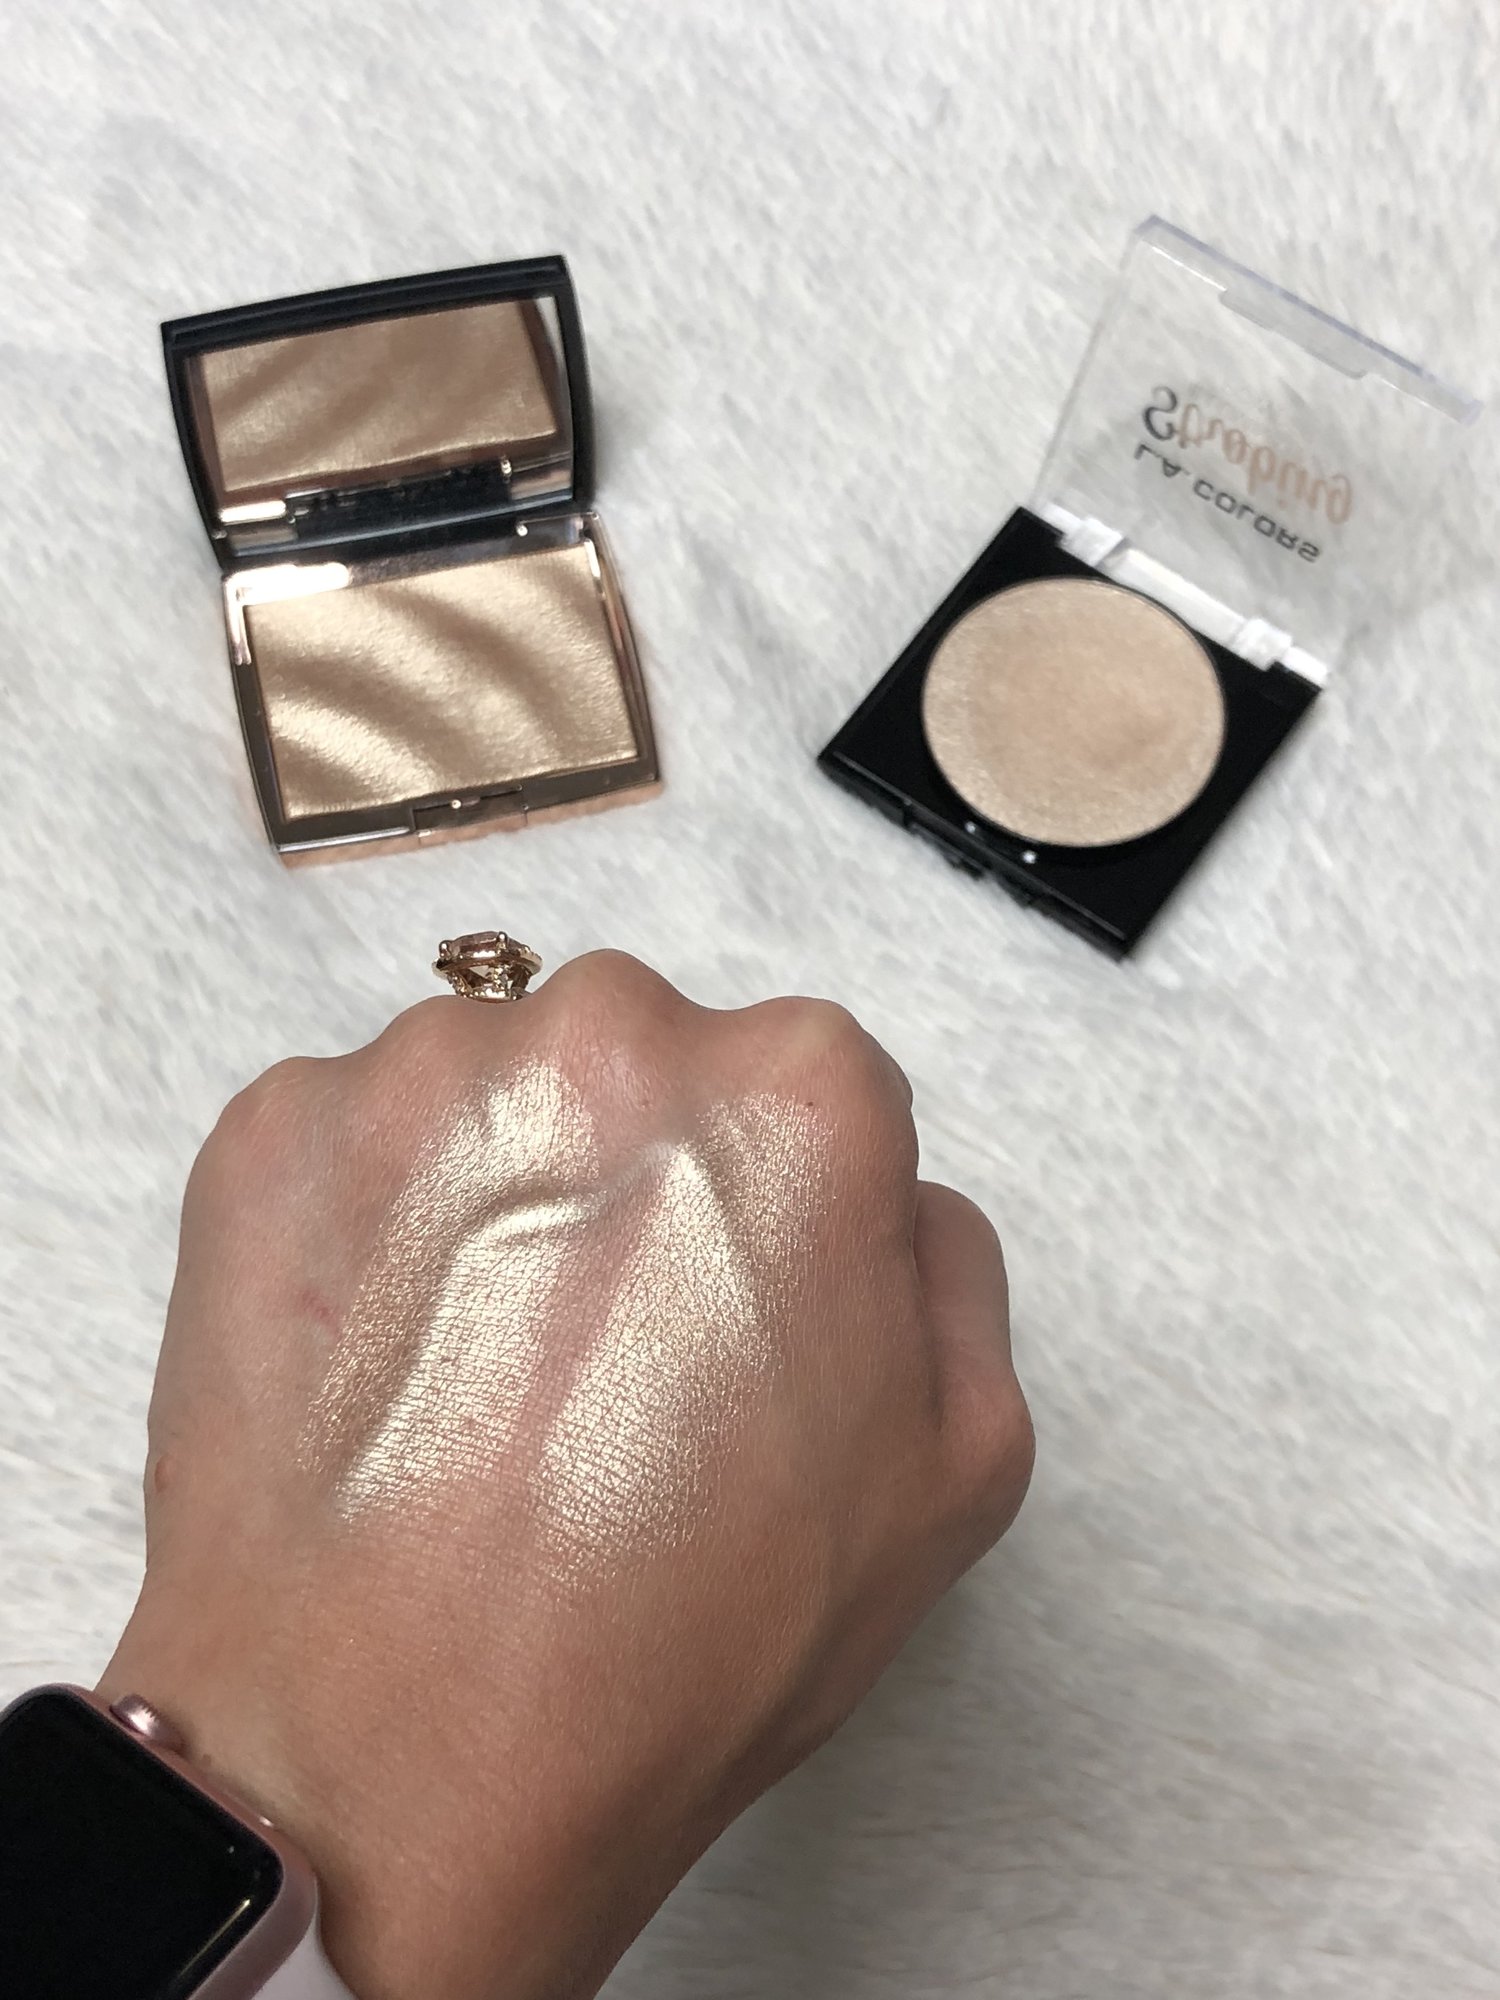 ABH x Amrezy Highlighter Dupe alicia bice